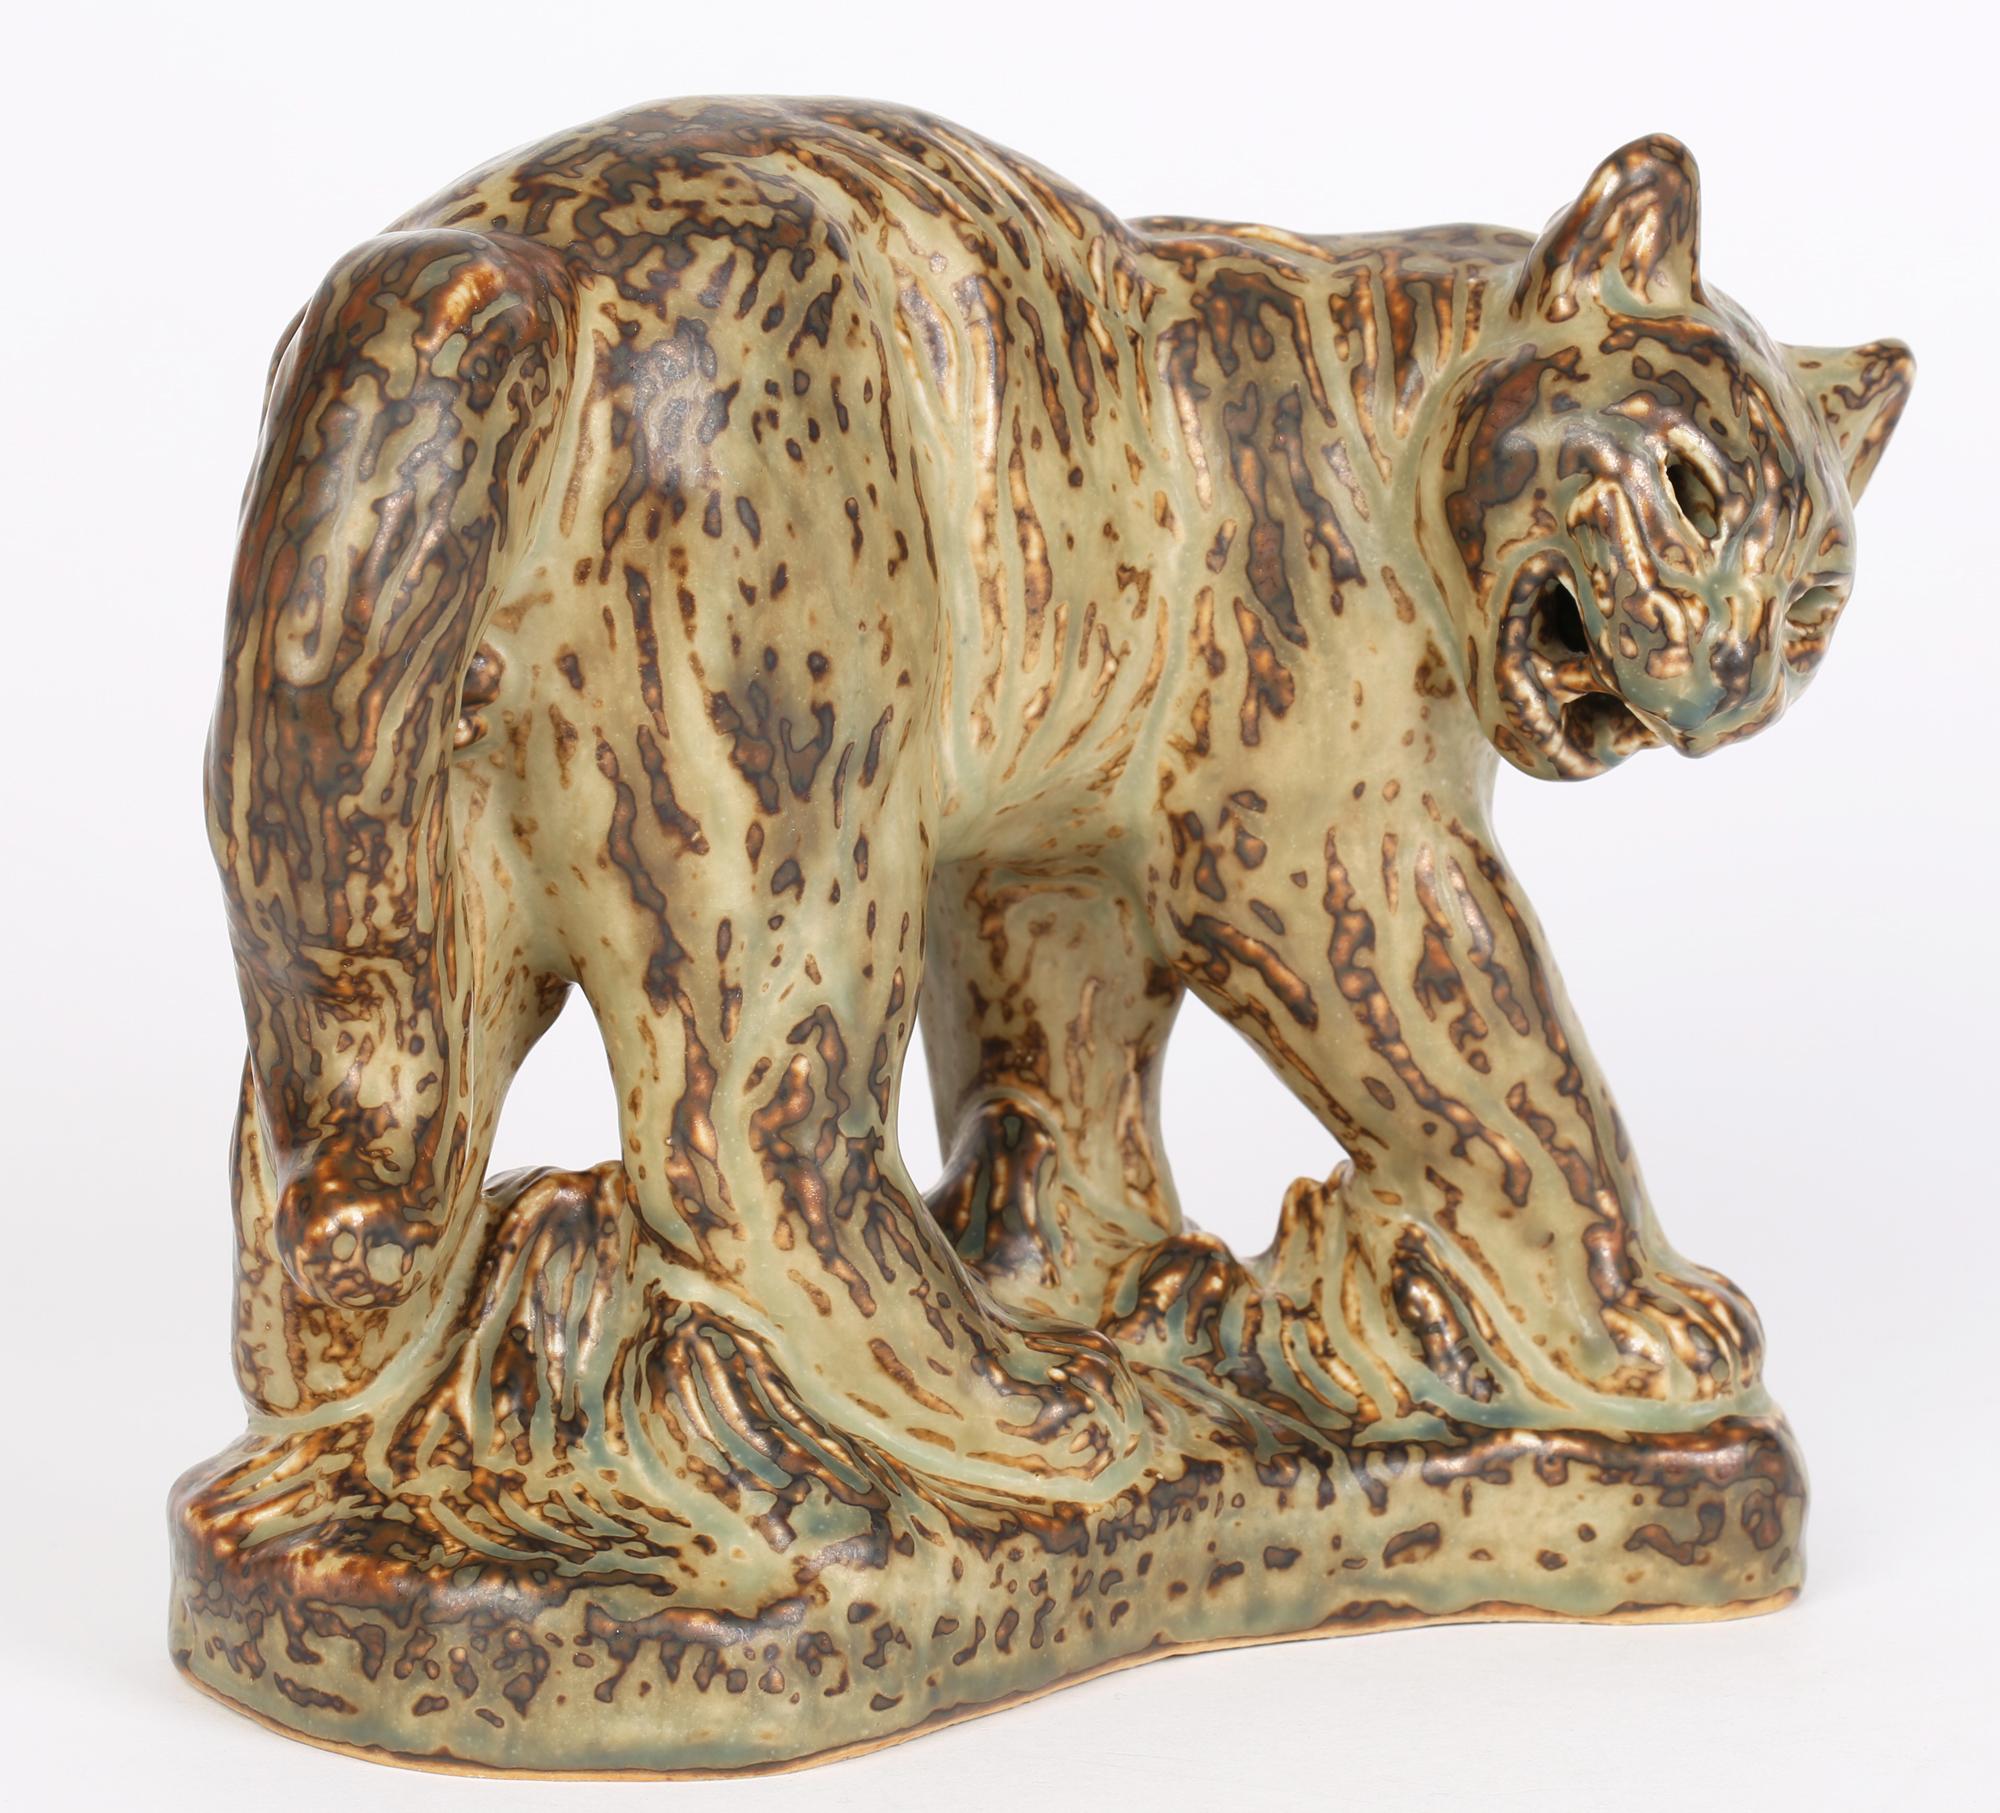 A large and stunning Danish Royal Copenhagen porcelain sculptural figure of a Puma by renowned animal artist Khud Kyhn (Danish, 1880-1969) conceived around 1935. The heavily made sculpture stands raised on a crescent shaped molded base and stands in